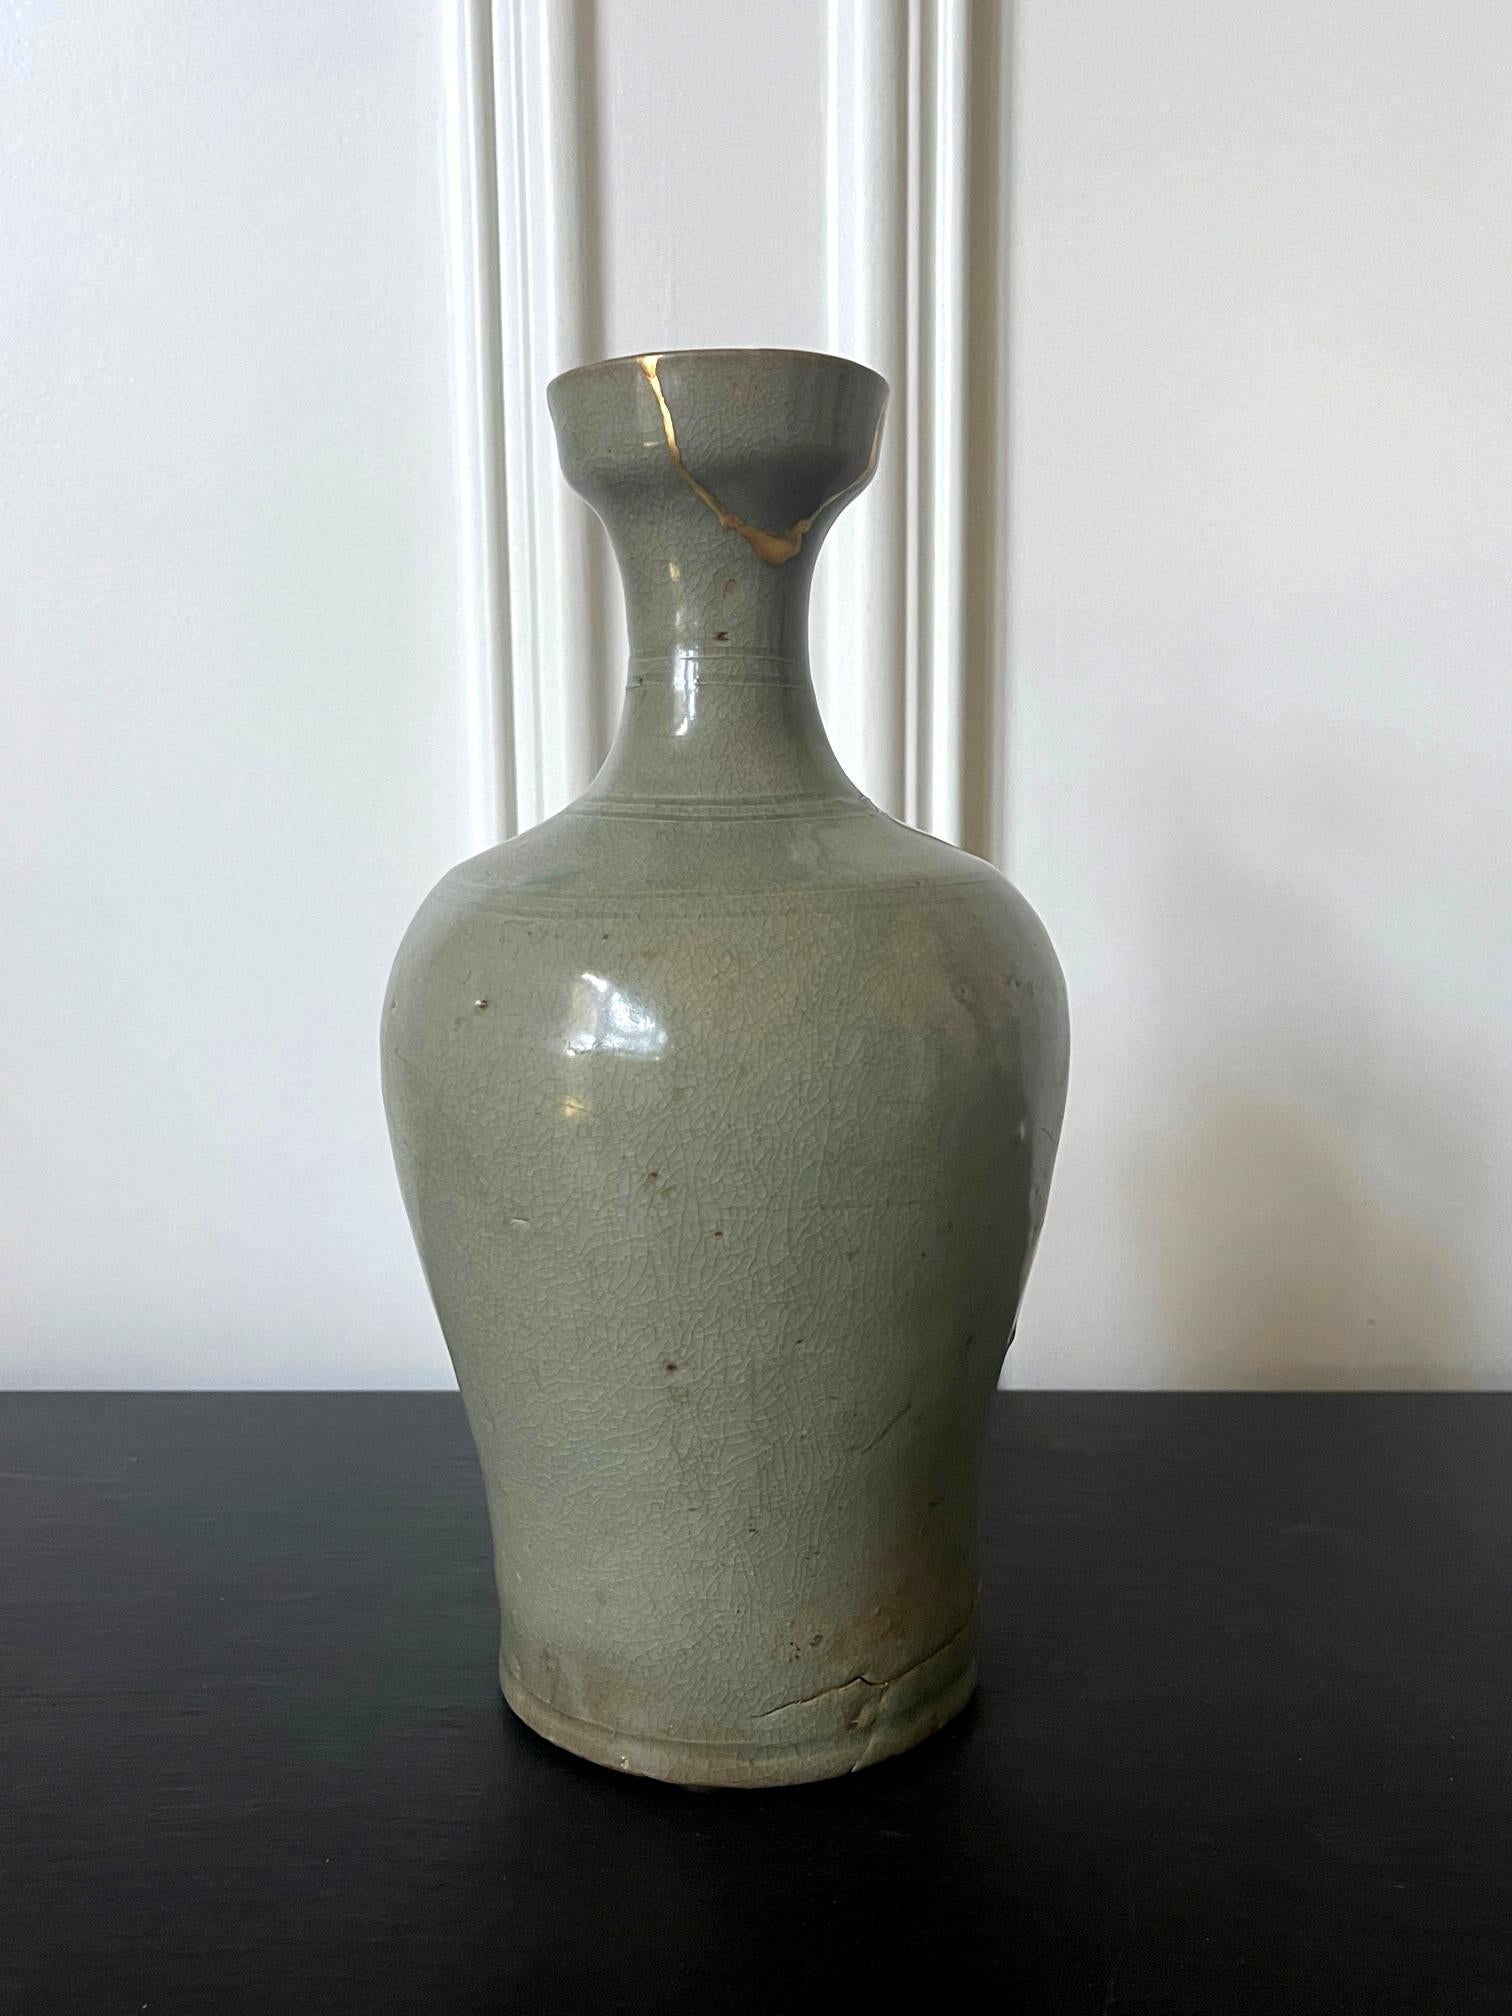 A ceramic wide-mouthed bottle vase covered in green celadon glaze from Goryeo dynasty circa 11-12th century. The bottle vase with such a form (mouth with wide rim, long and slender neck, tall body with swelled shoulders that taper down toward the